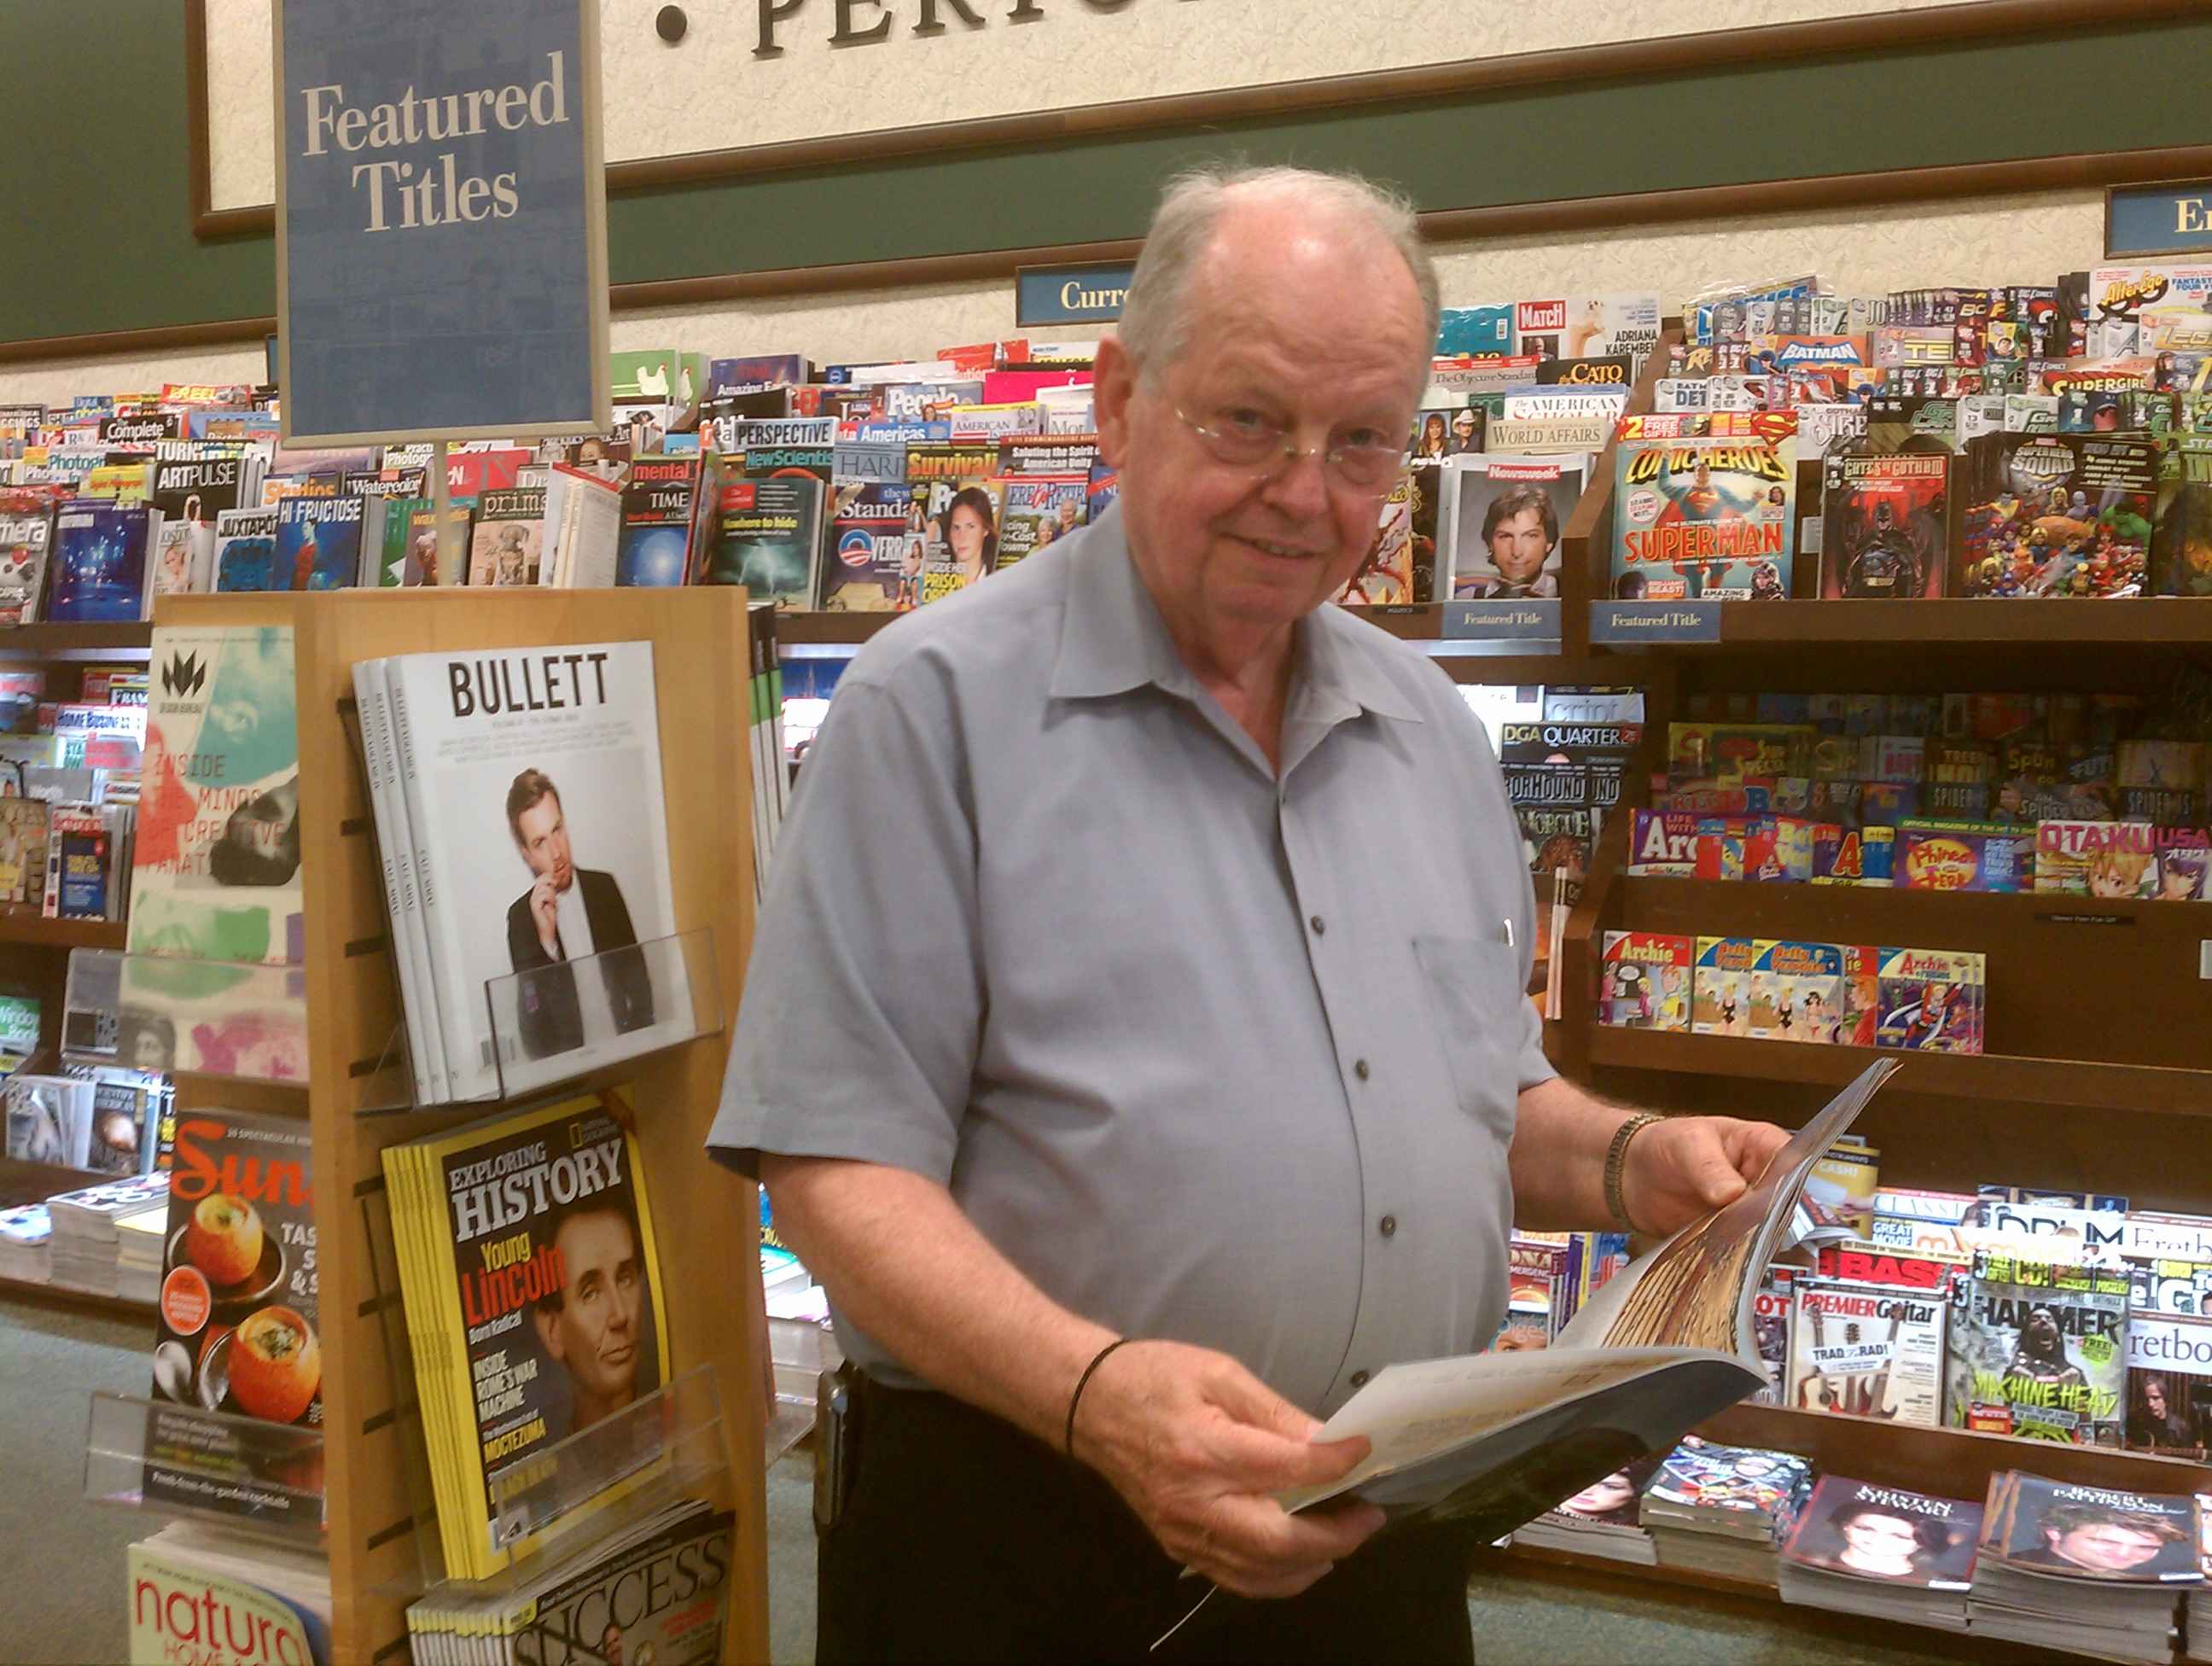 Ward at the bookstore